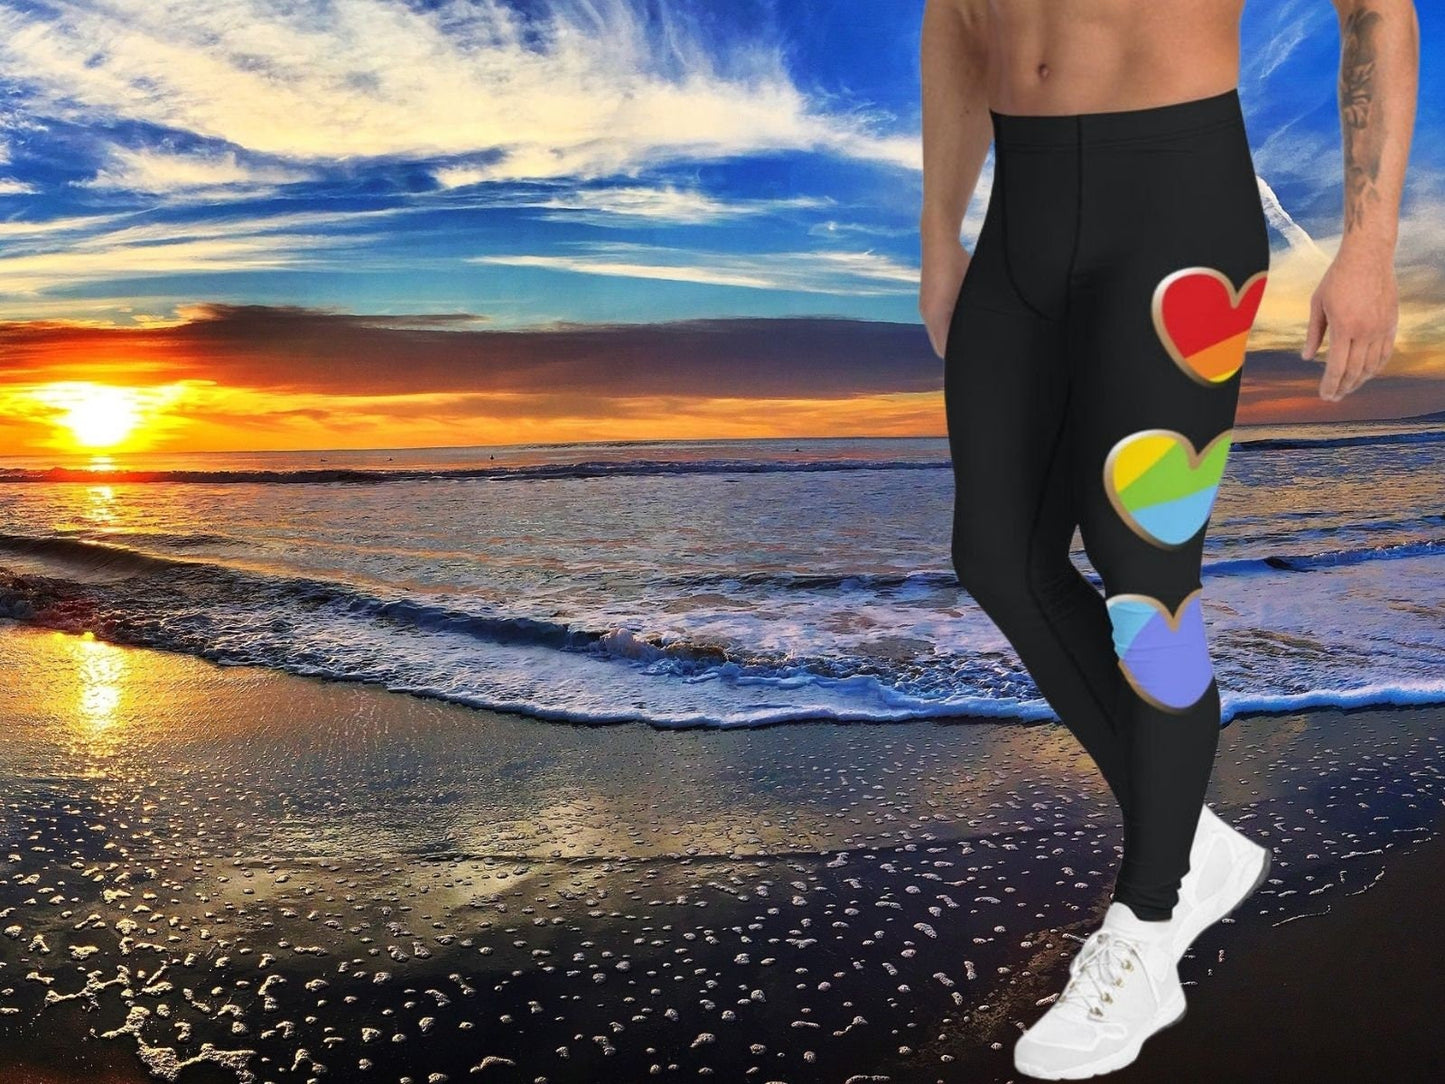 Pride Heart Meggings for Men Activewear Leggings LGBT Gay Pride Parade Sports Workout Outfit Colorful Fun Spandex Pants Boyfriend Birthday